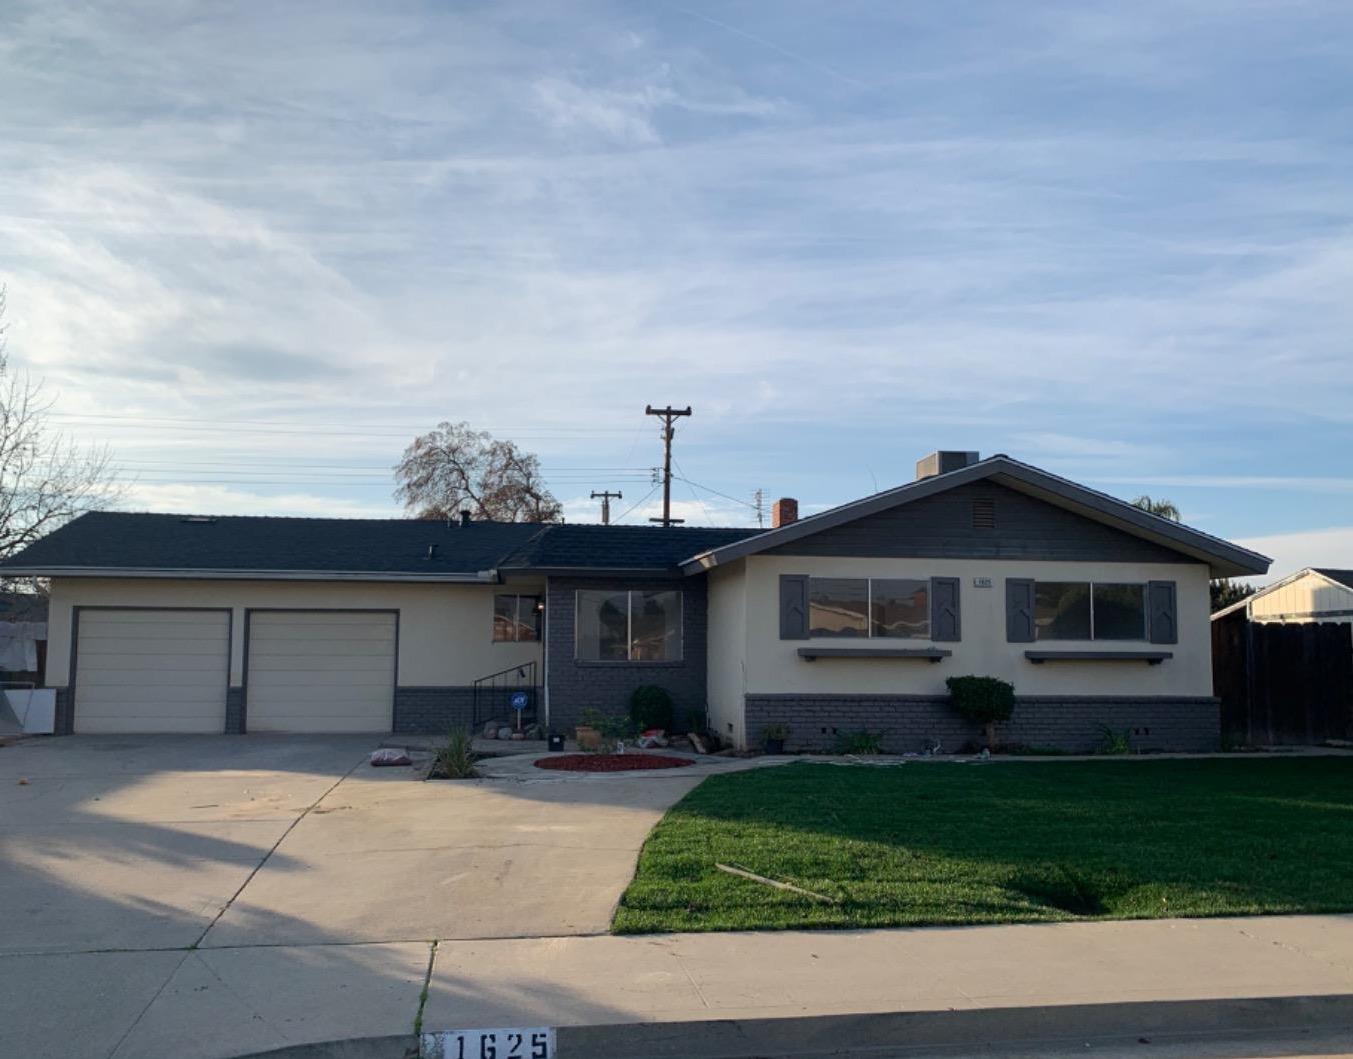 Photo of 1625 Richard Ave in Sanger, CA